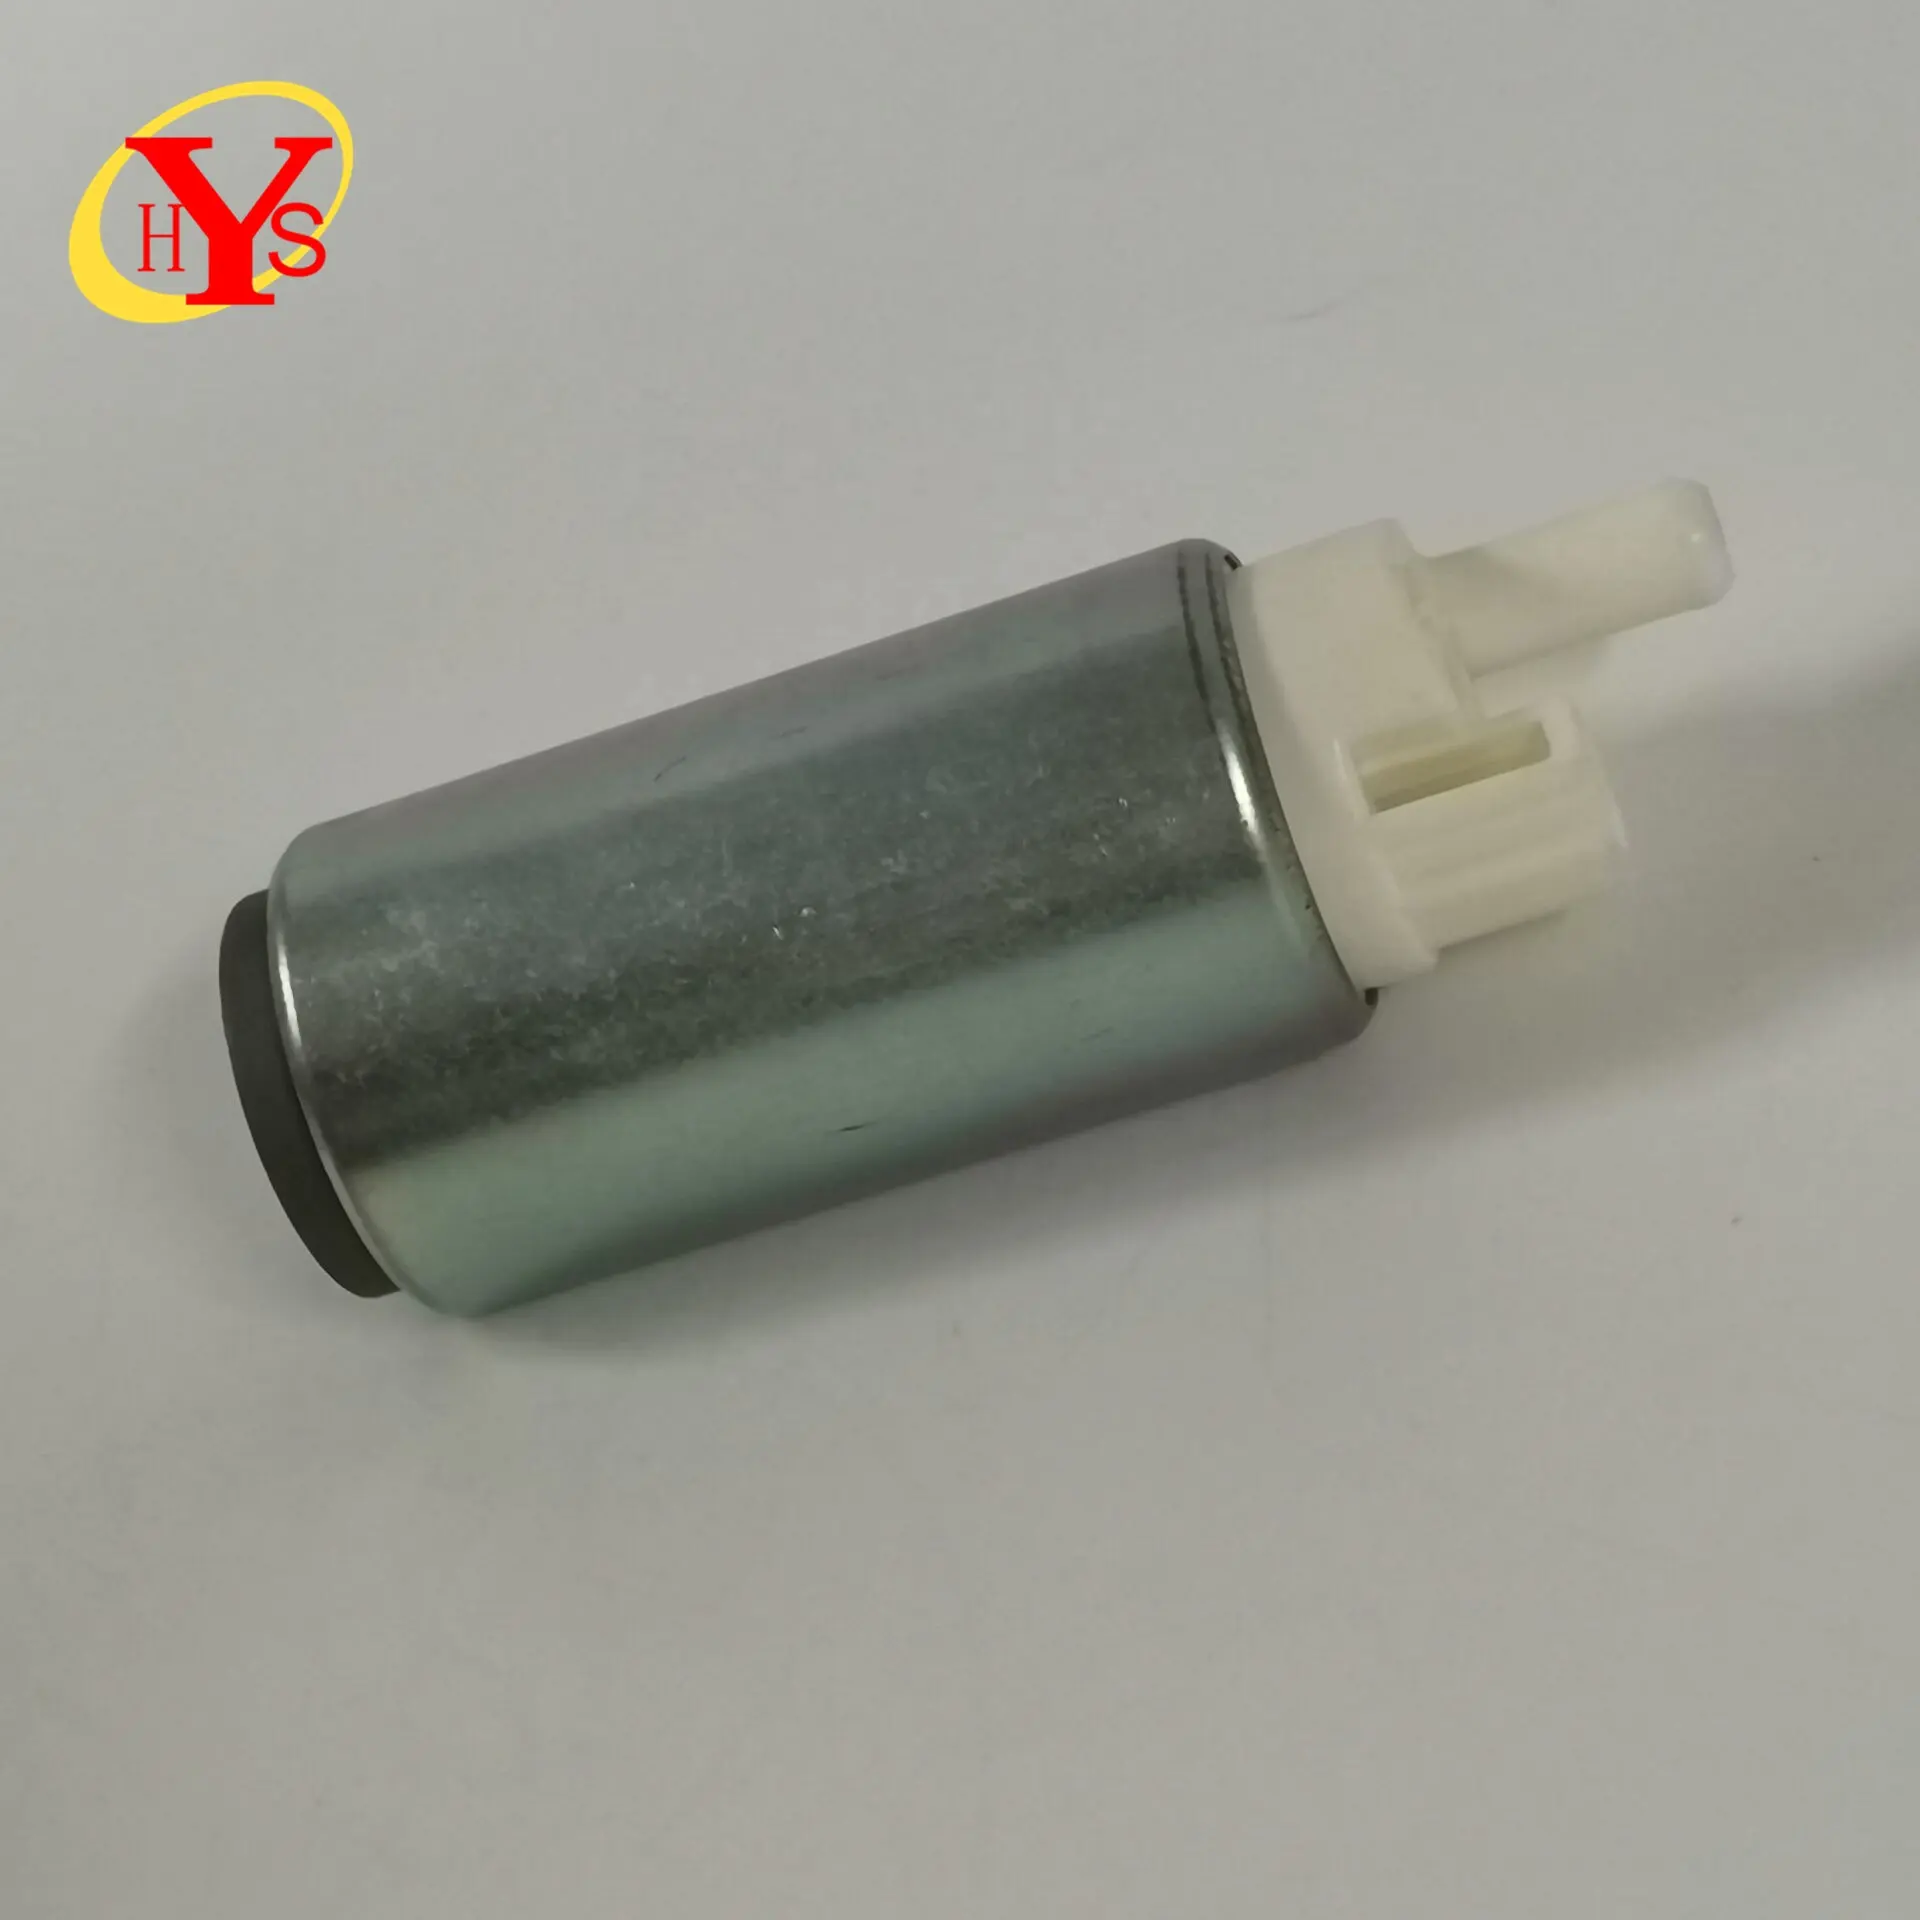 HYS High safety long life factory price Electrical Fuel Pump UC-T30 for SUZUKI GSR600 OEM 15100-57B01 15100-80C01 15100-01H00